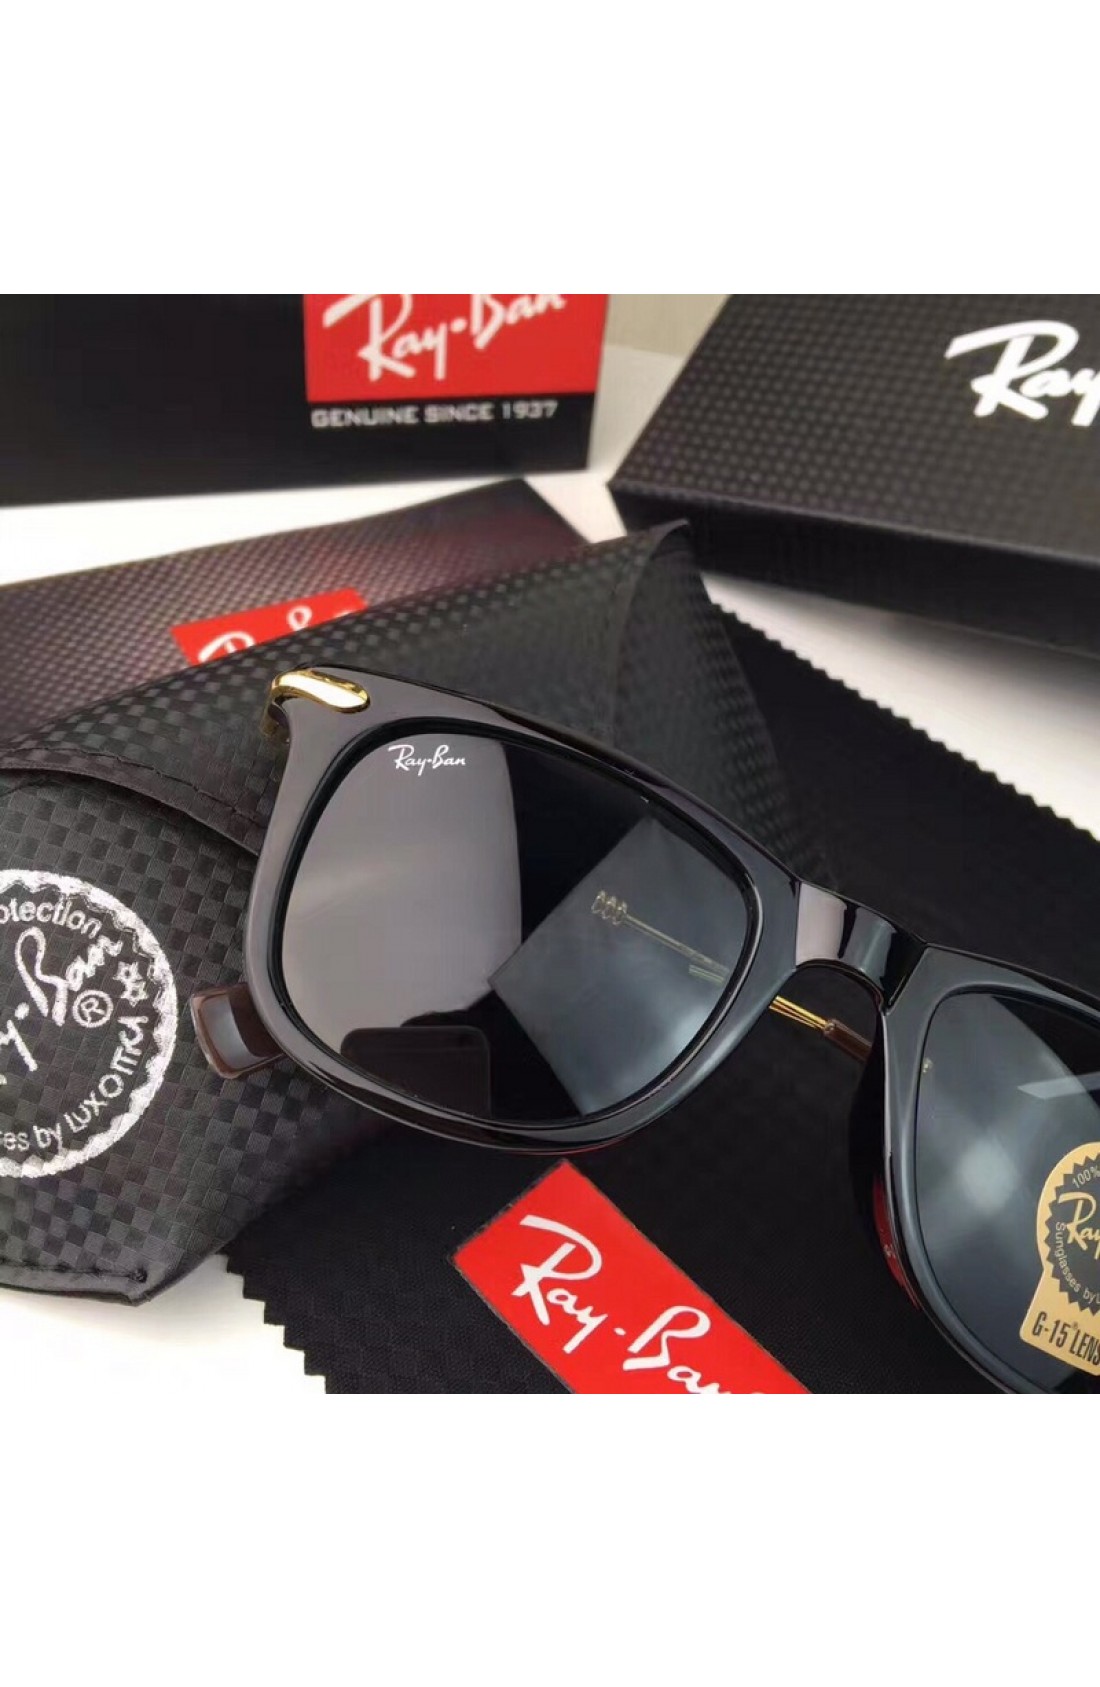 ray ban offers online